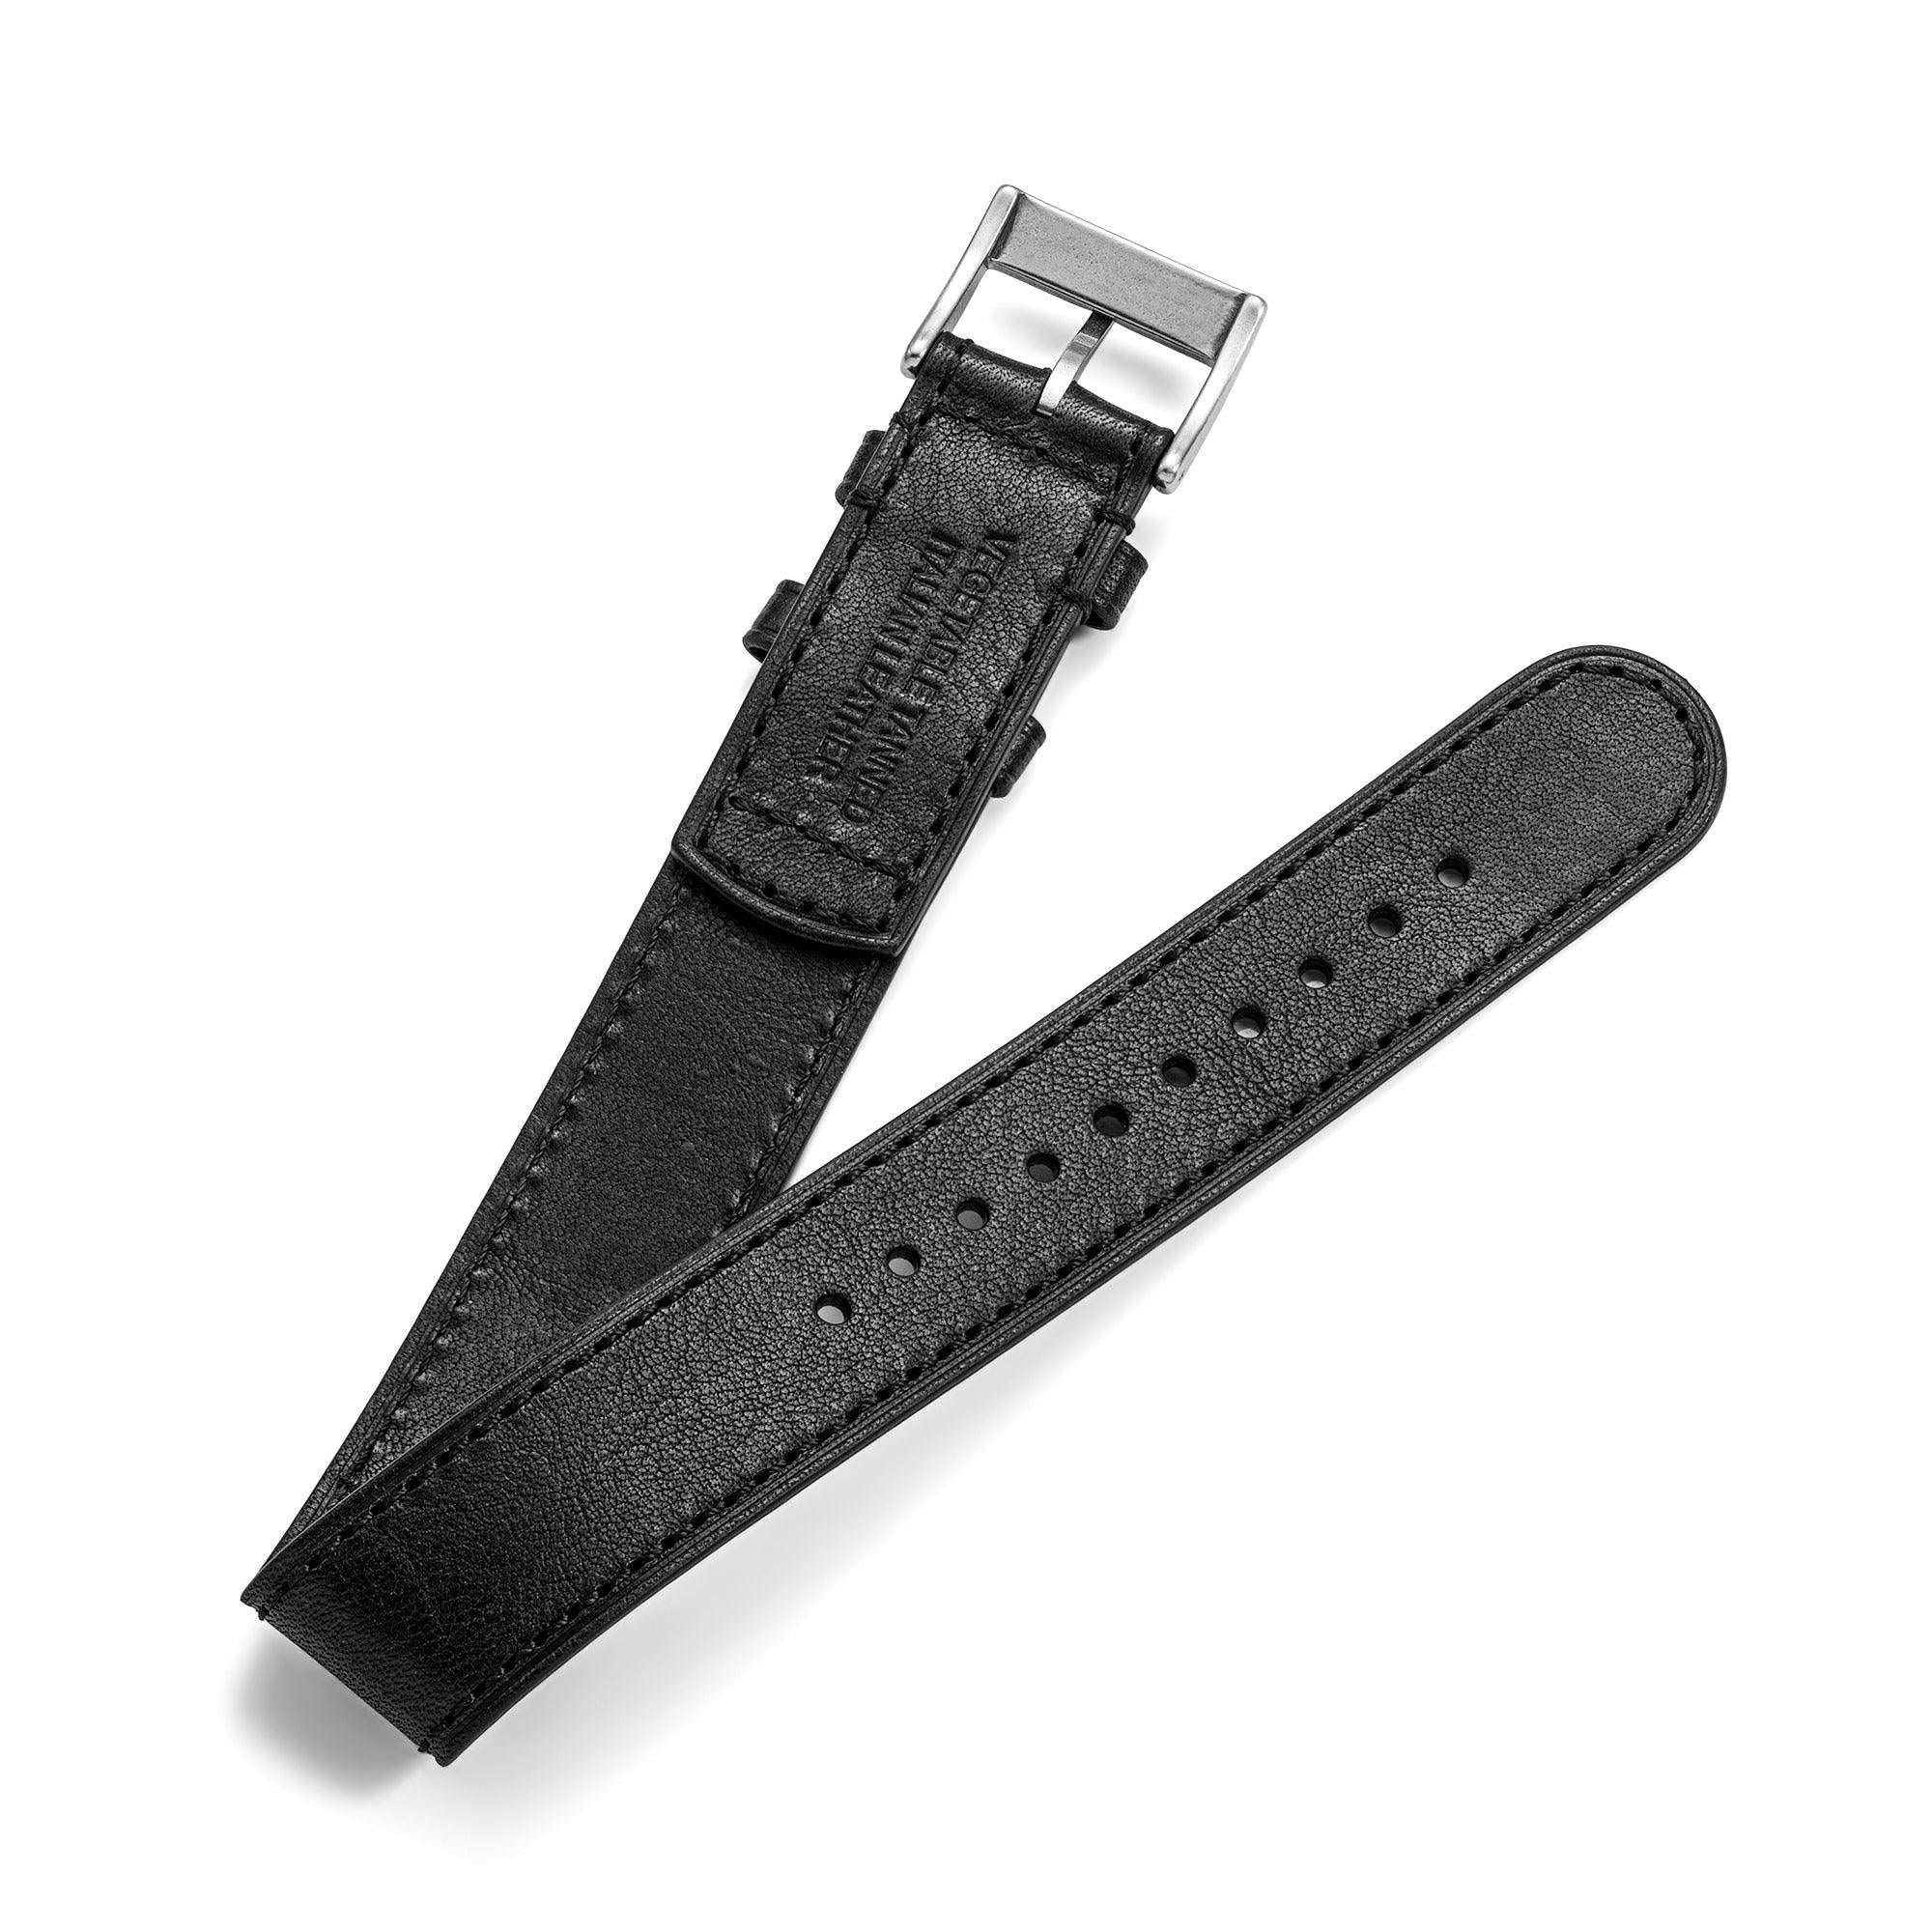 One-Piece Black Leather Band & Steel Buckle